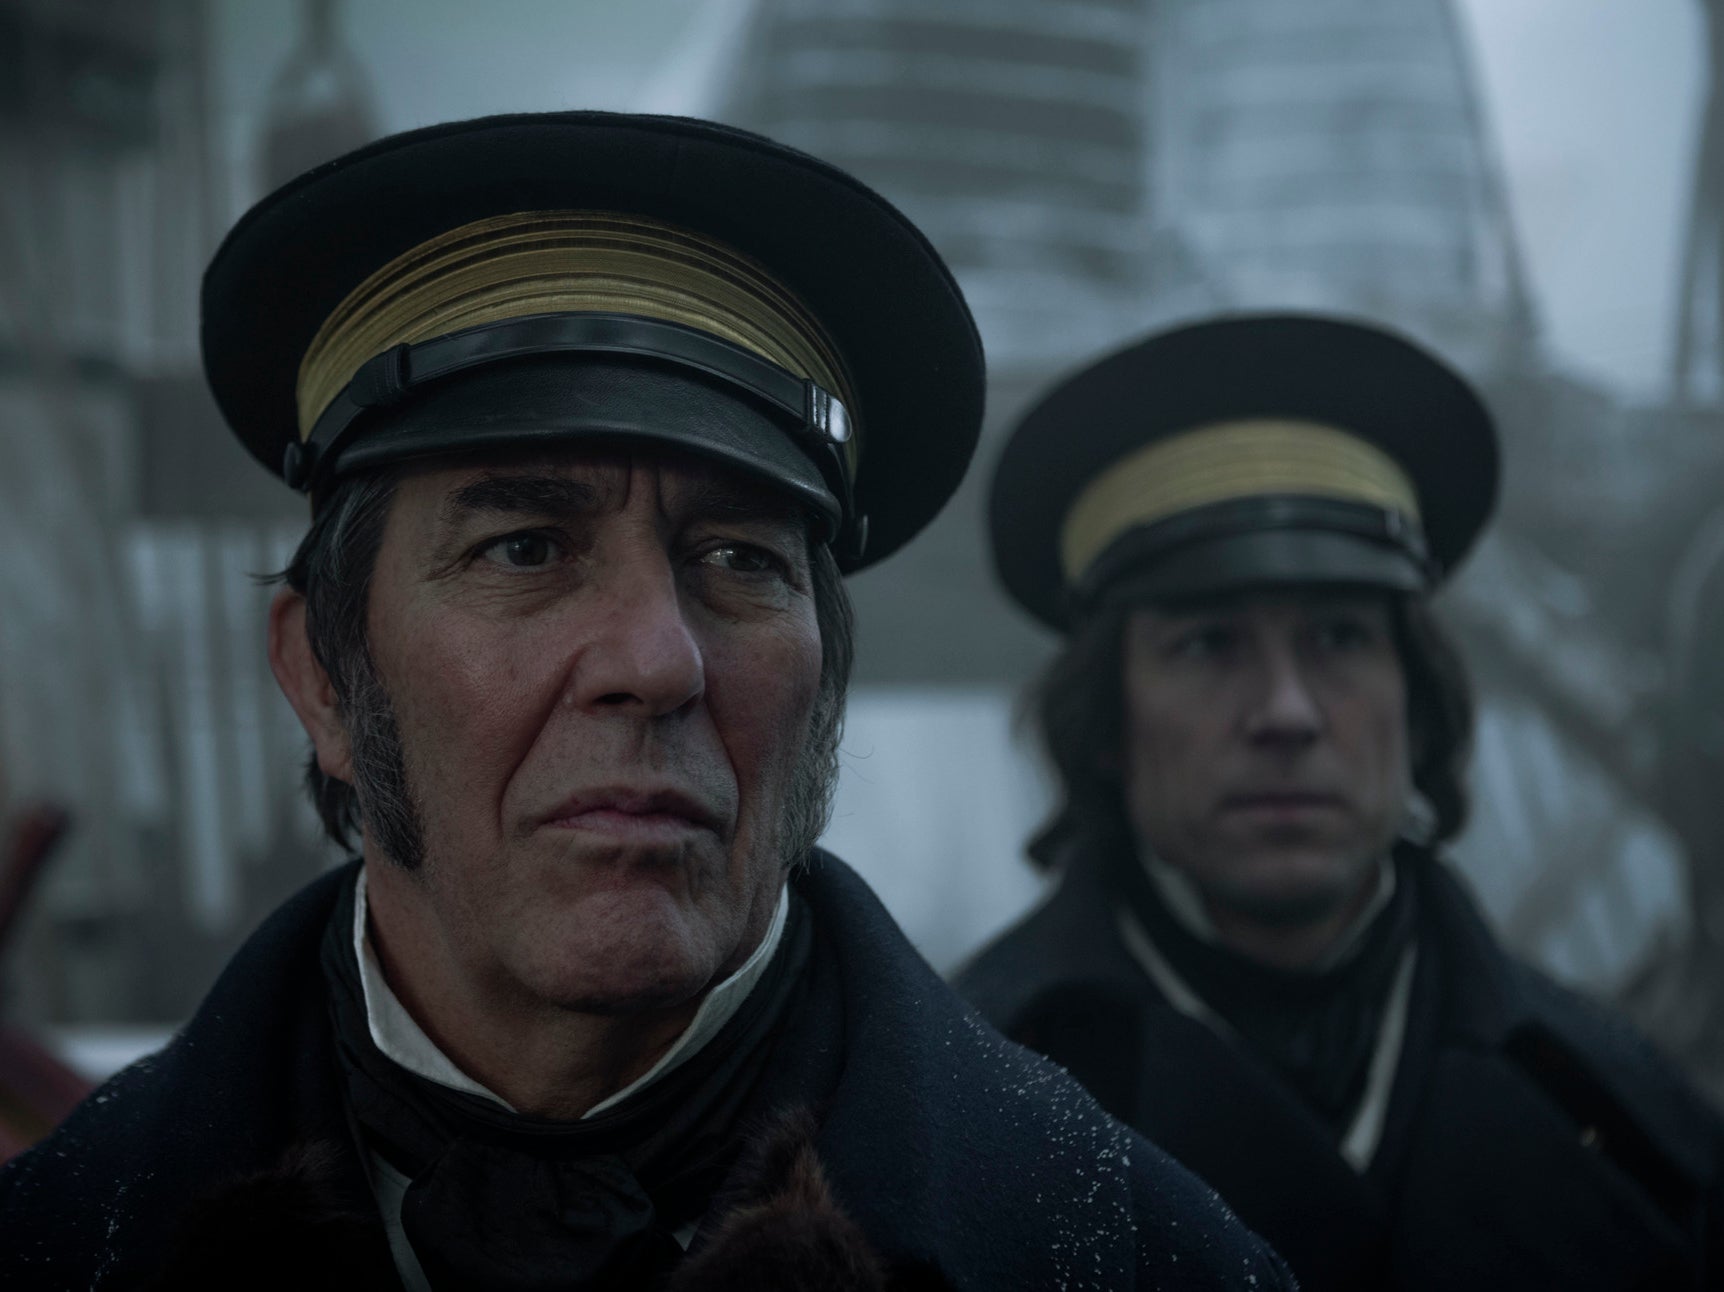 Sir John Franklin (Ciaran Hinds) and James Fitzjames (Tobias Menzies) in The Terror